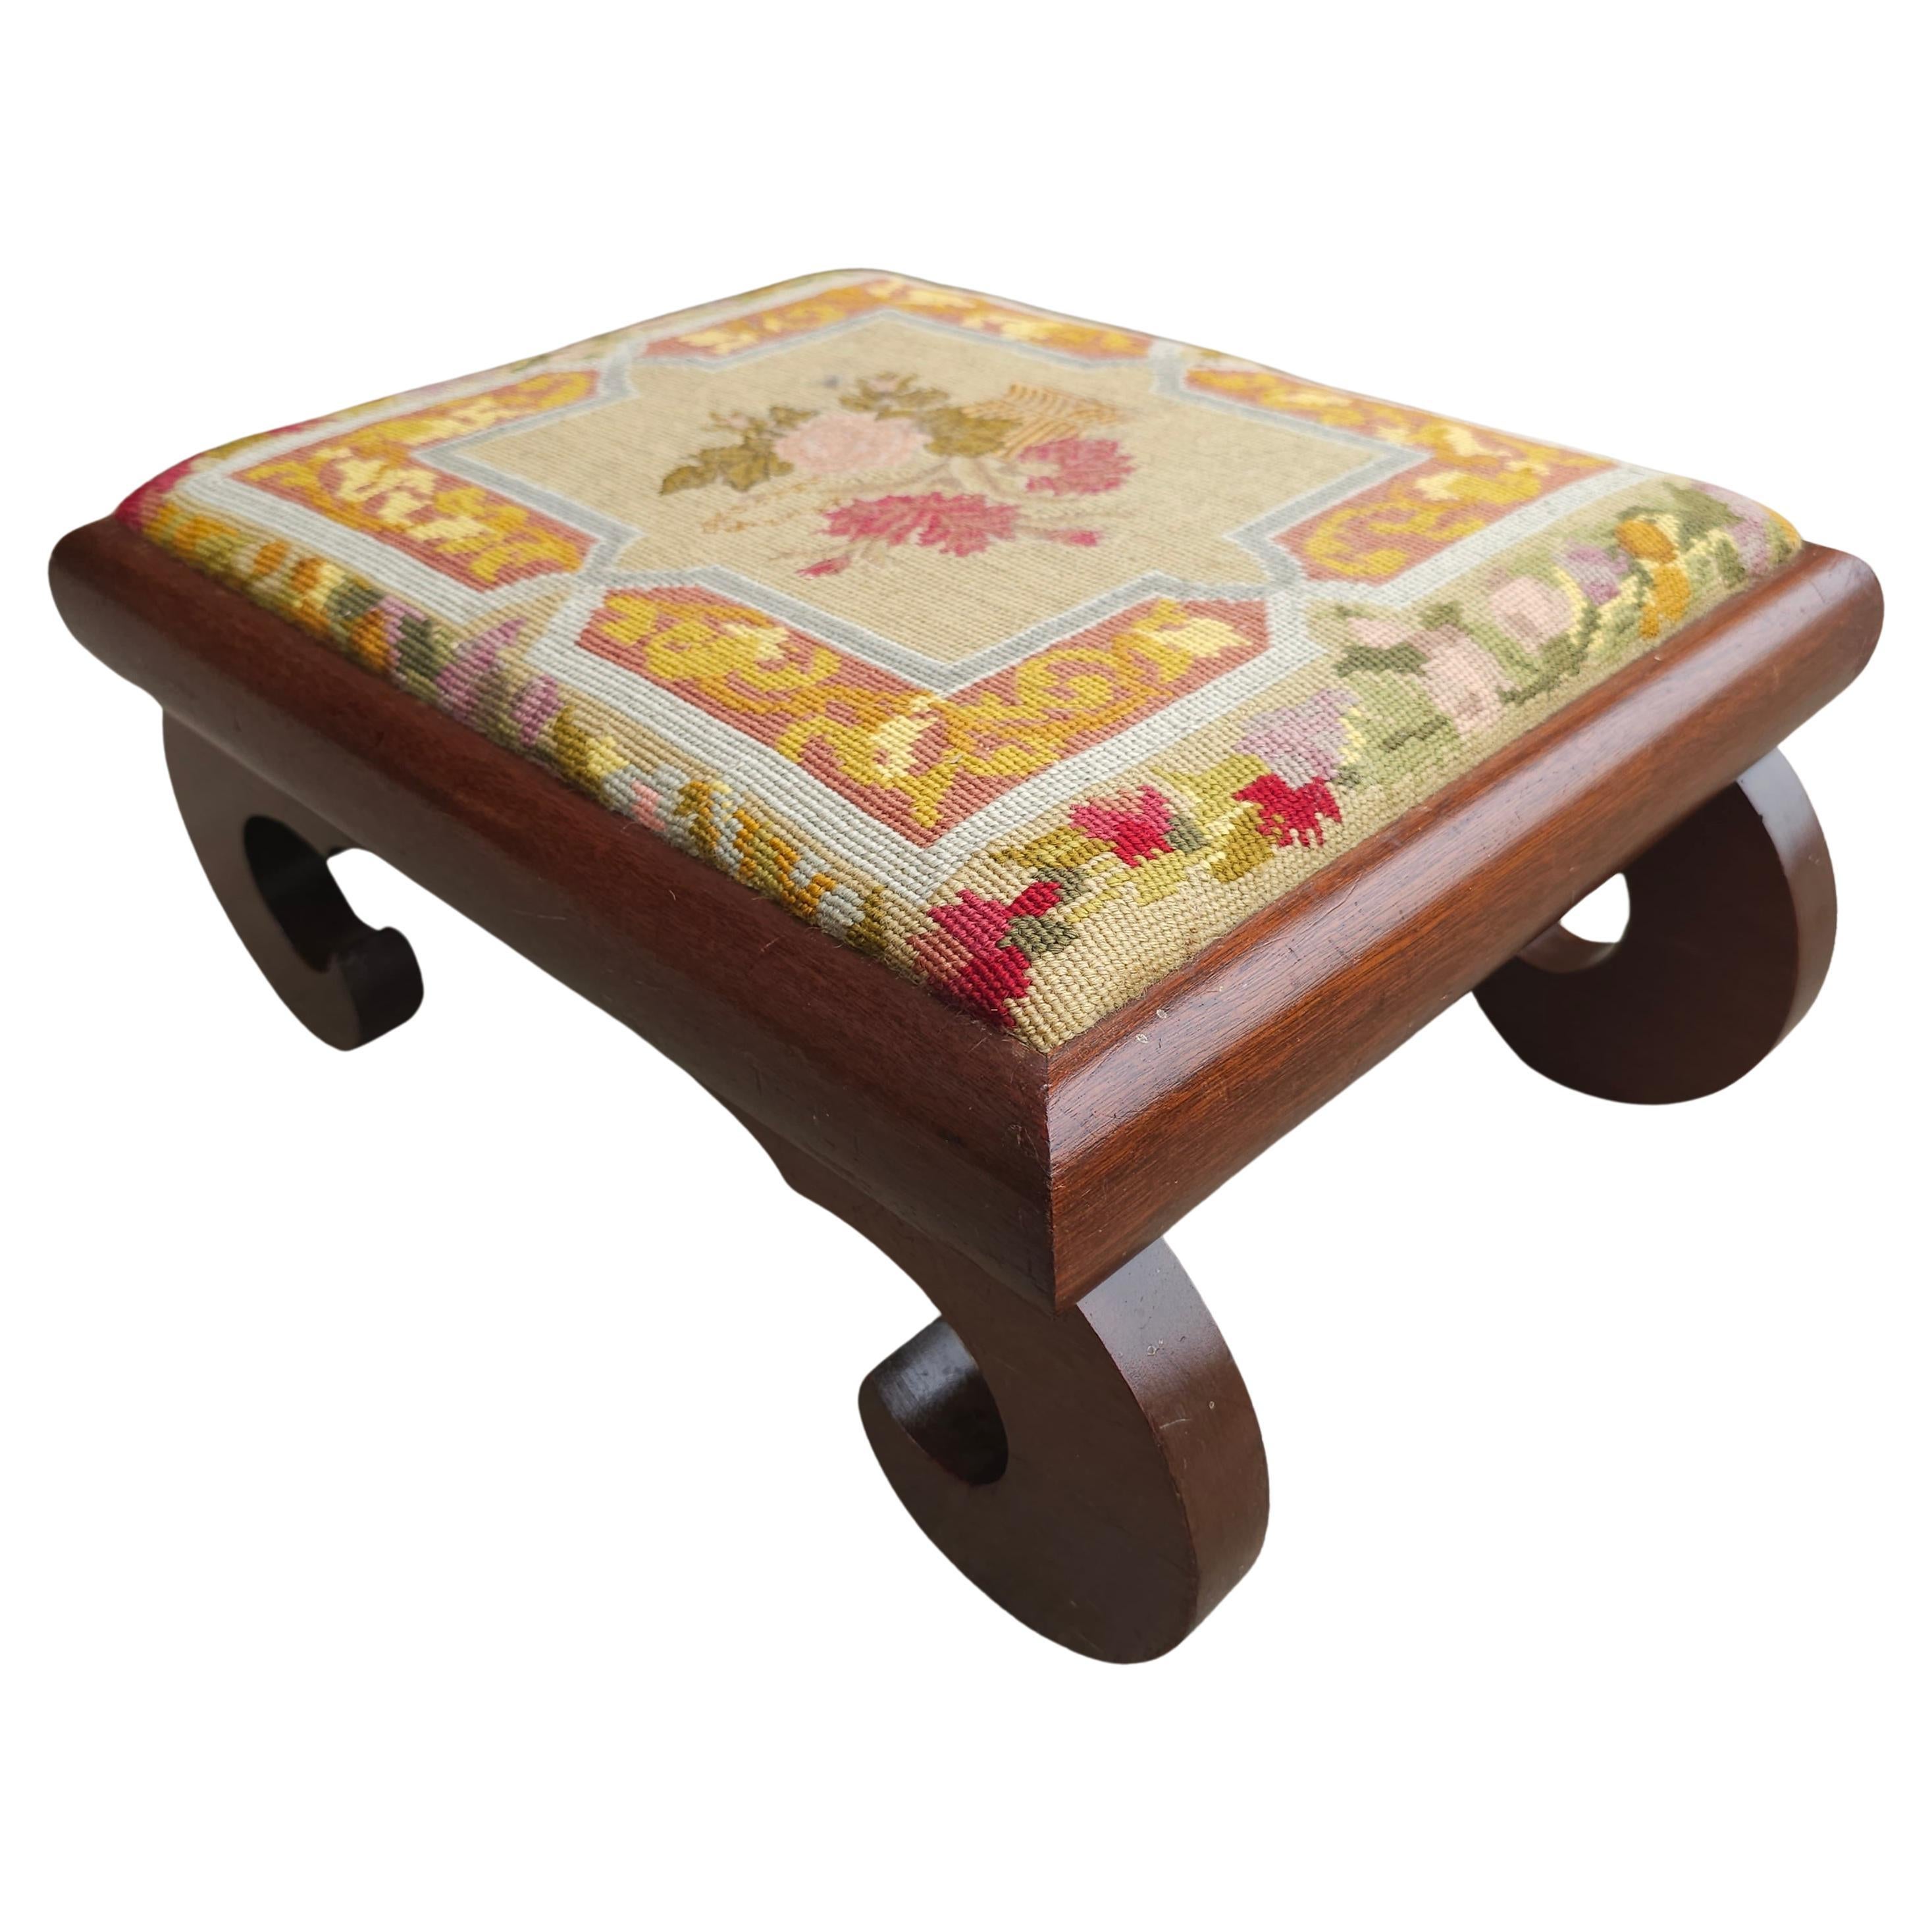 Mahogany 19th Century American Empire Magogany and Needlepoint Upholstered Foot Stool For Sale